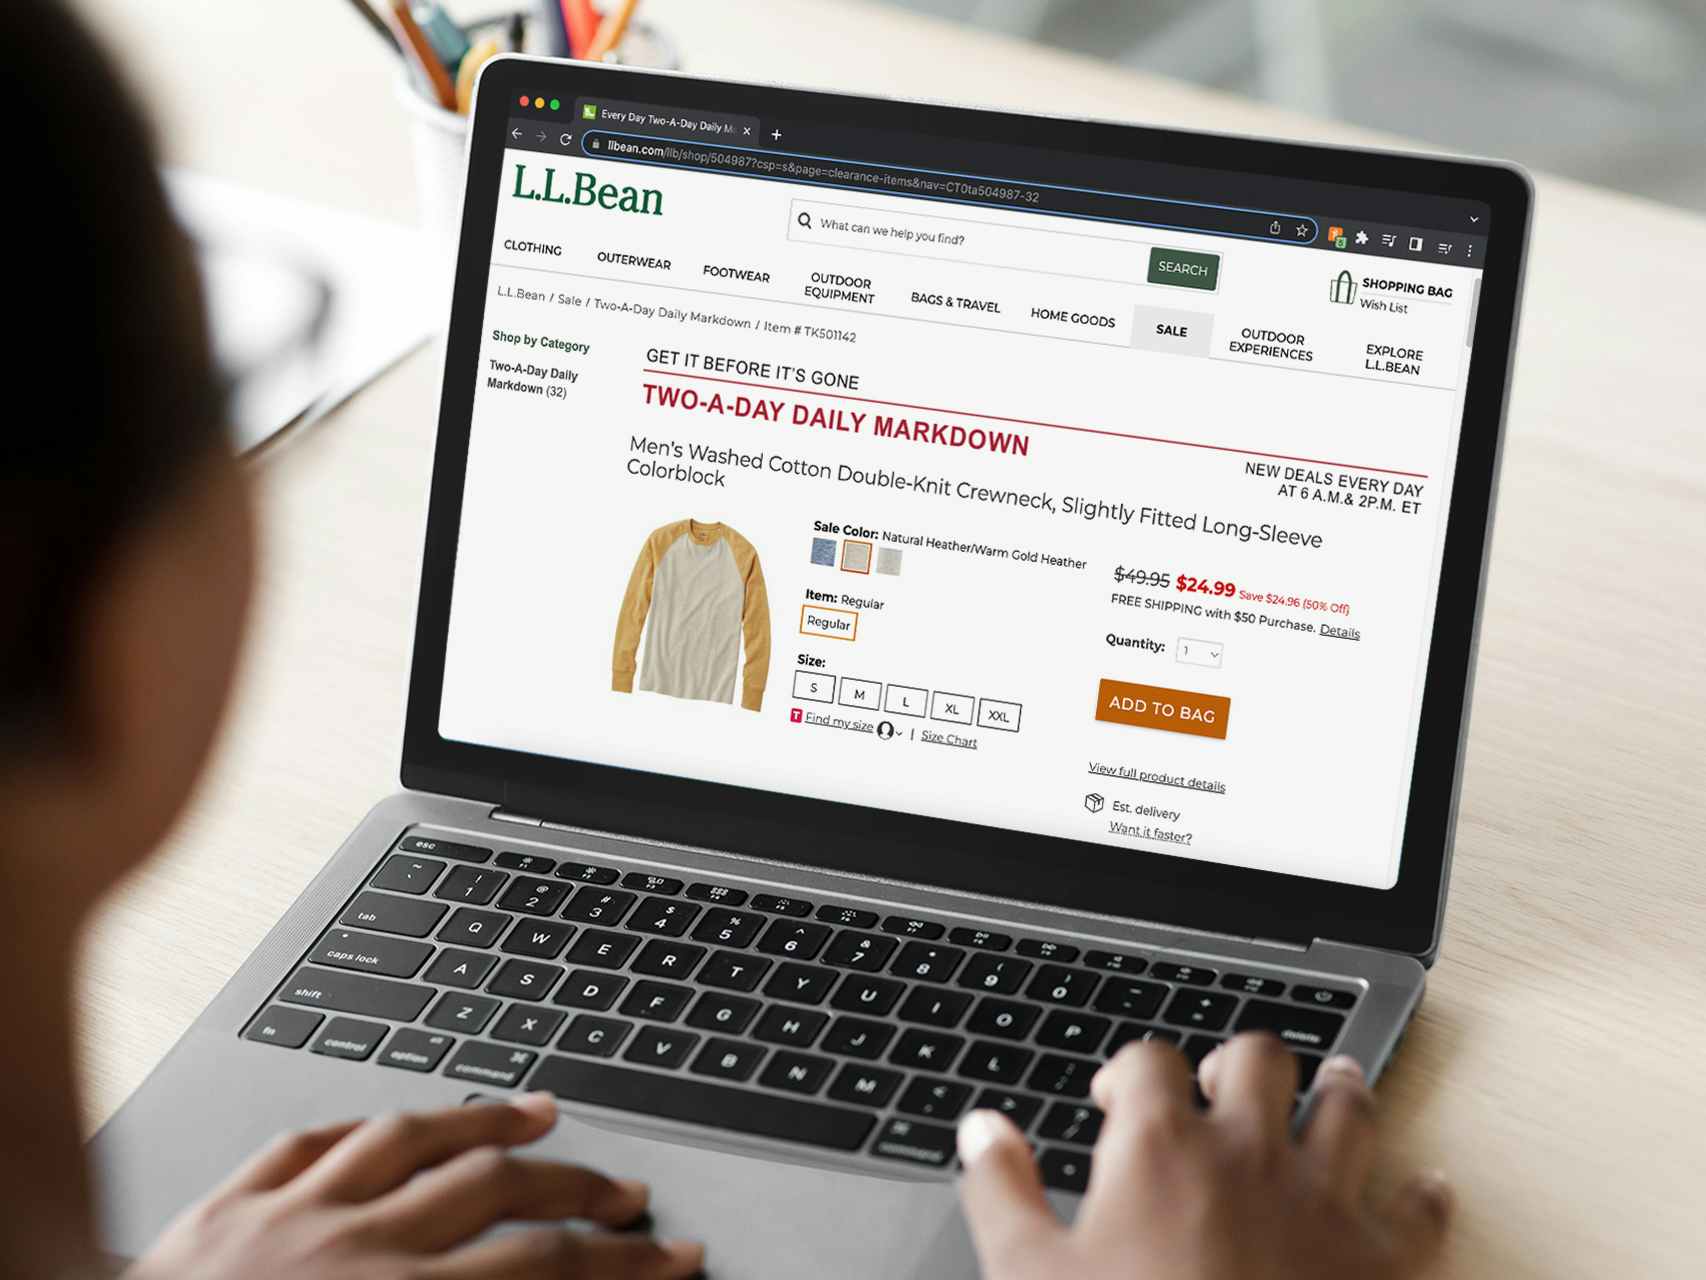 A person using a laptop displaying the Two a day daily markdowns on the L.L.Bean website.